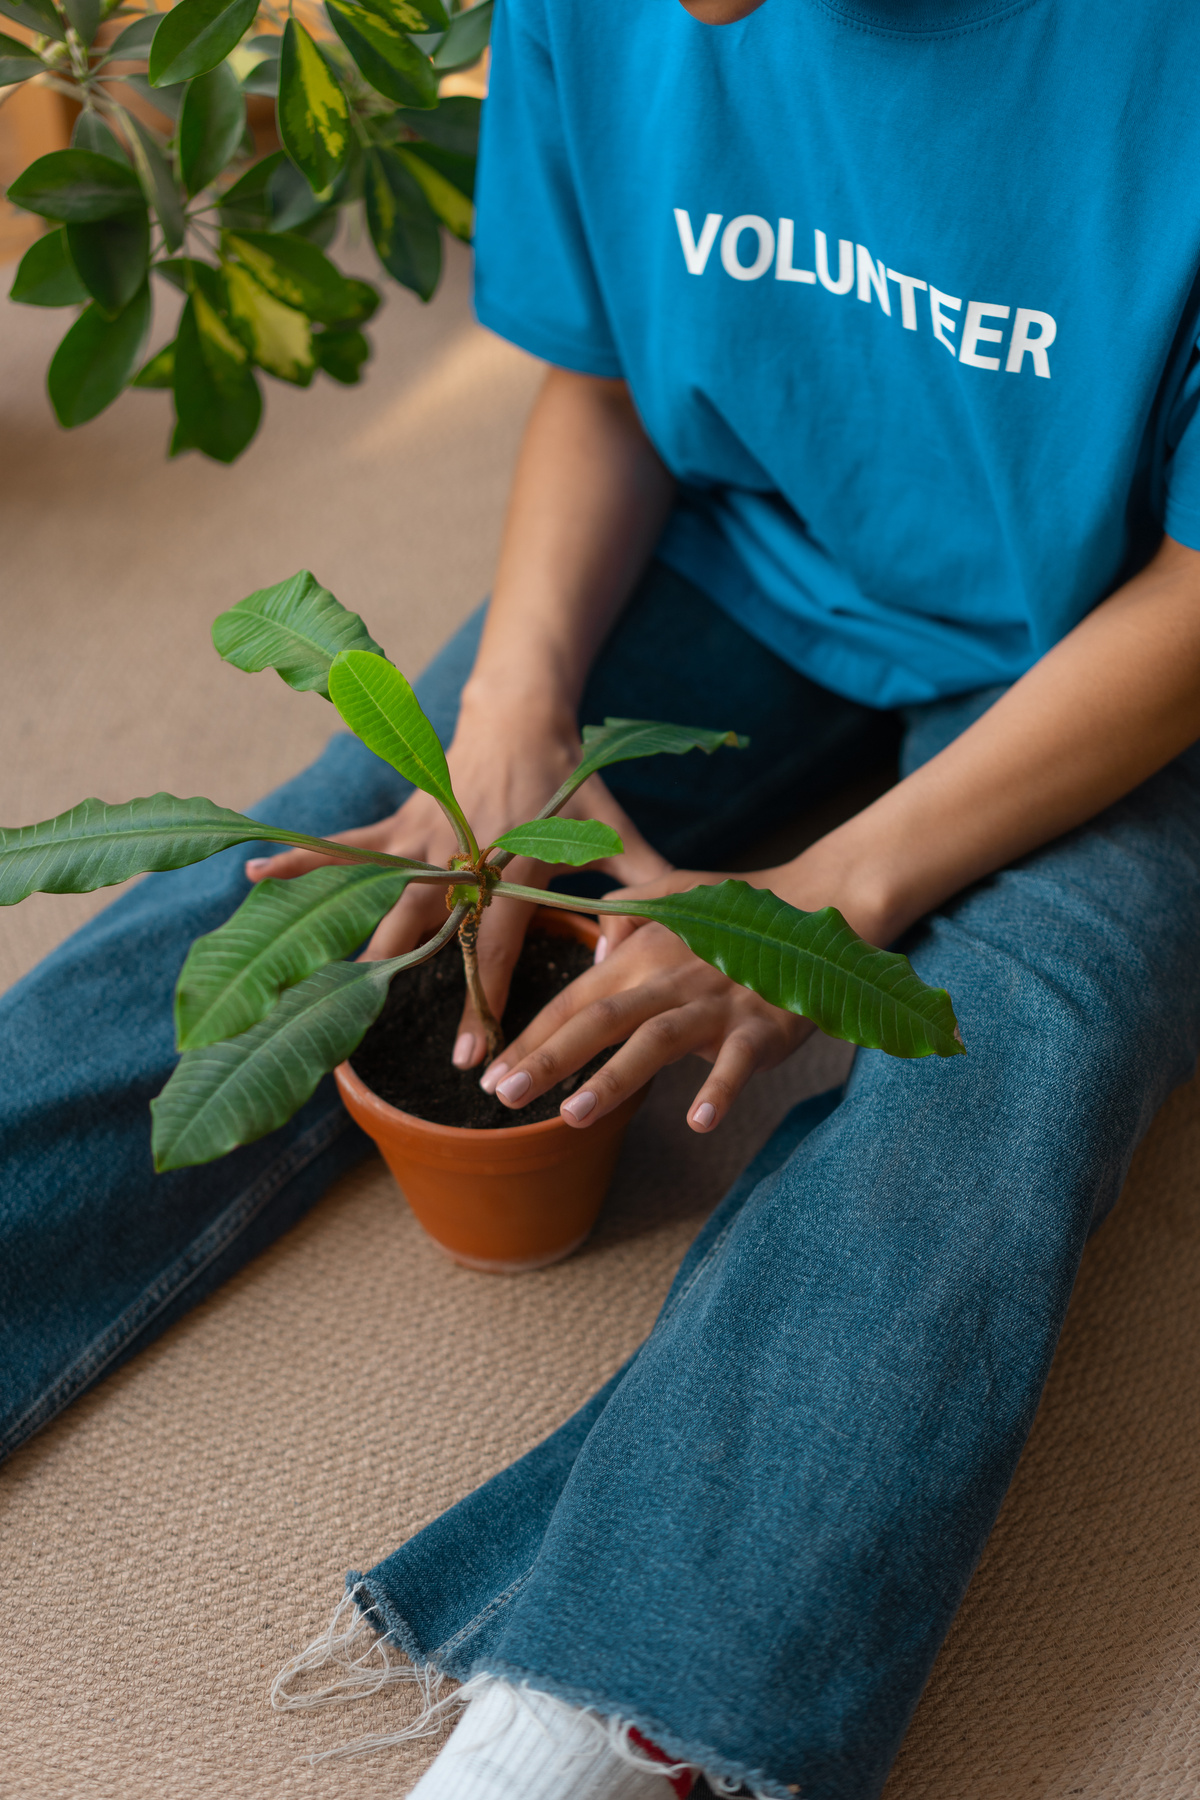 A Person in Blue Volunteer Shirt and Blue Denim Jeans Transplanting a Plant i Brown Pot